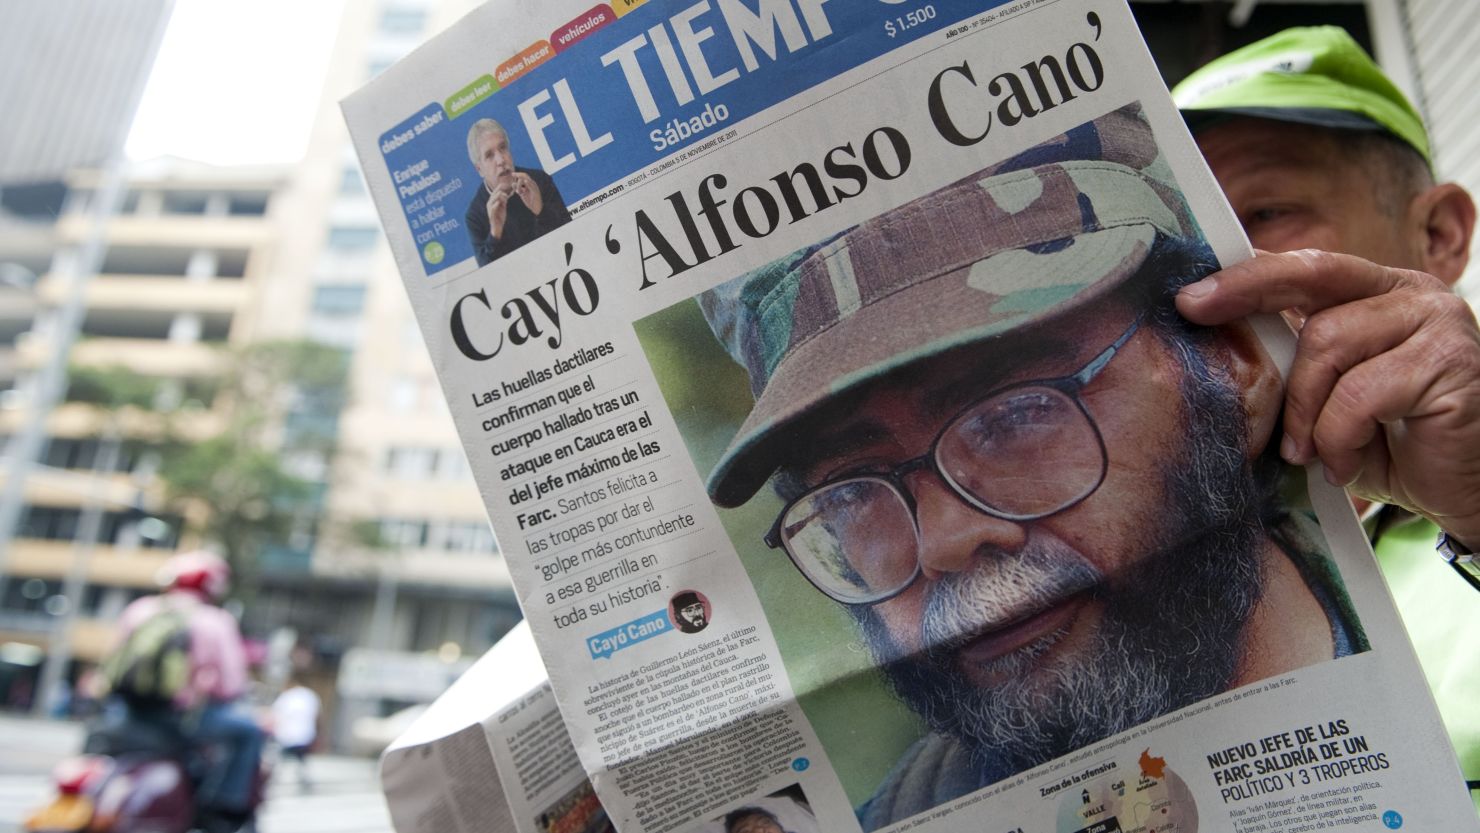  A man at a newsstand n Medellin, Colombia, reads about the death of the leader of FARC last year.